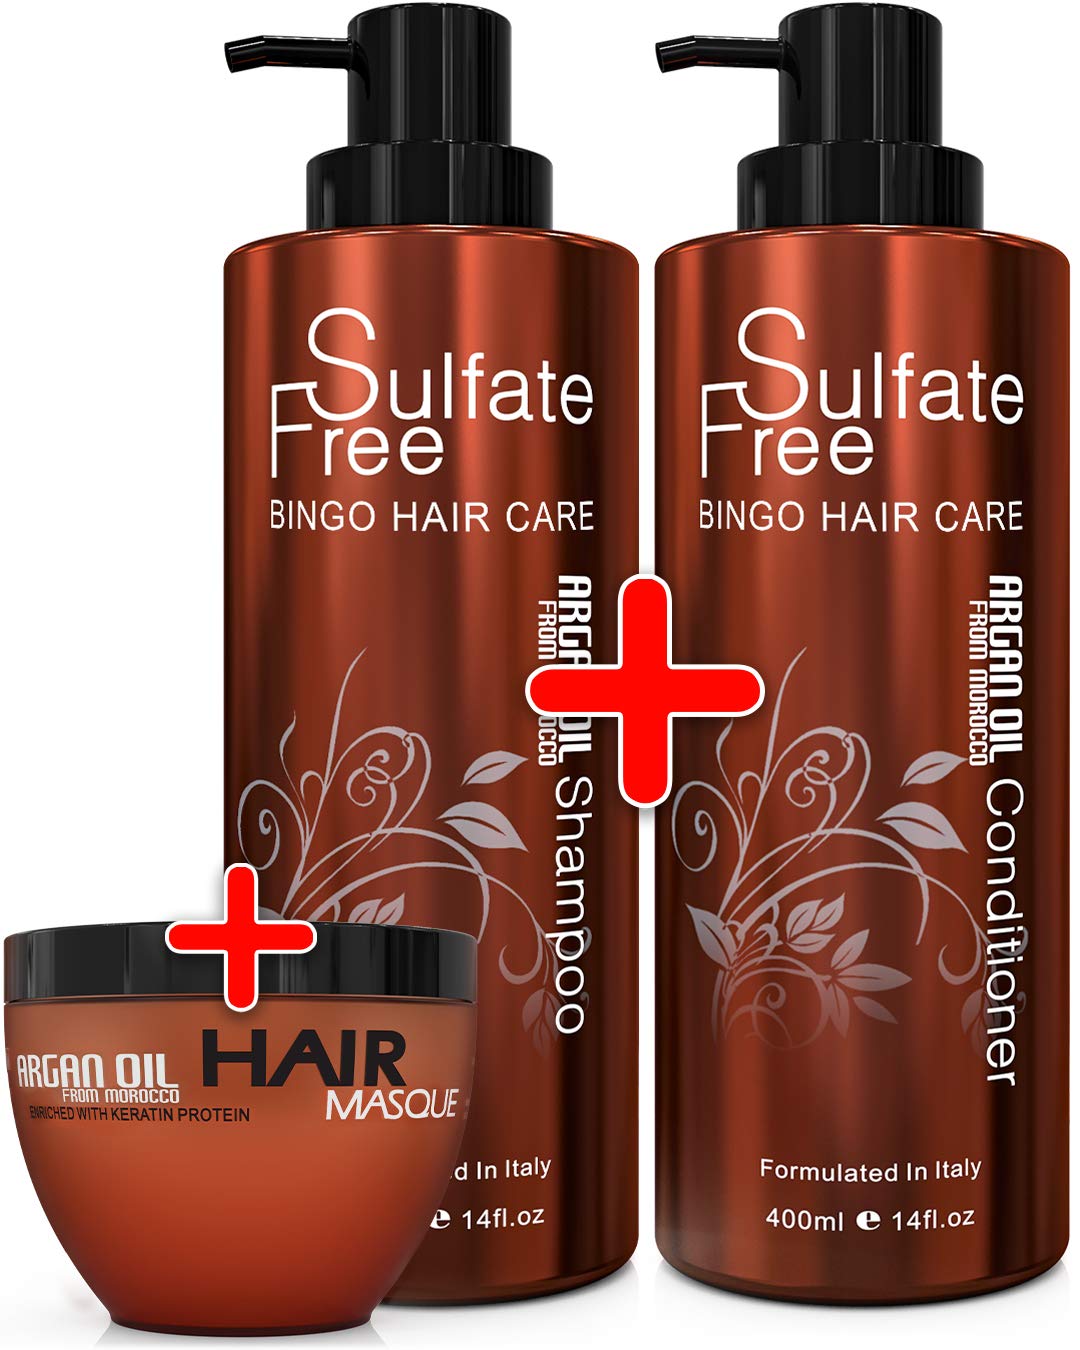 Moroccan Argan Oil Sulfate Free Shampoo and Conditioner Set and Hair Mask- Best for Damaged, Dry, Curly or Frizzy Hair - Thickening for Fine/Thin Hair, Safe for Color-Treated, Keratin Treated Hair